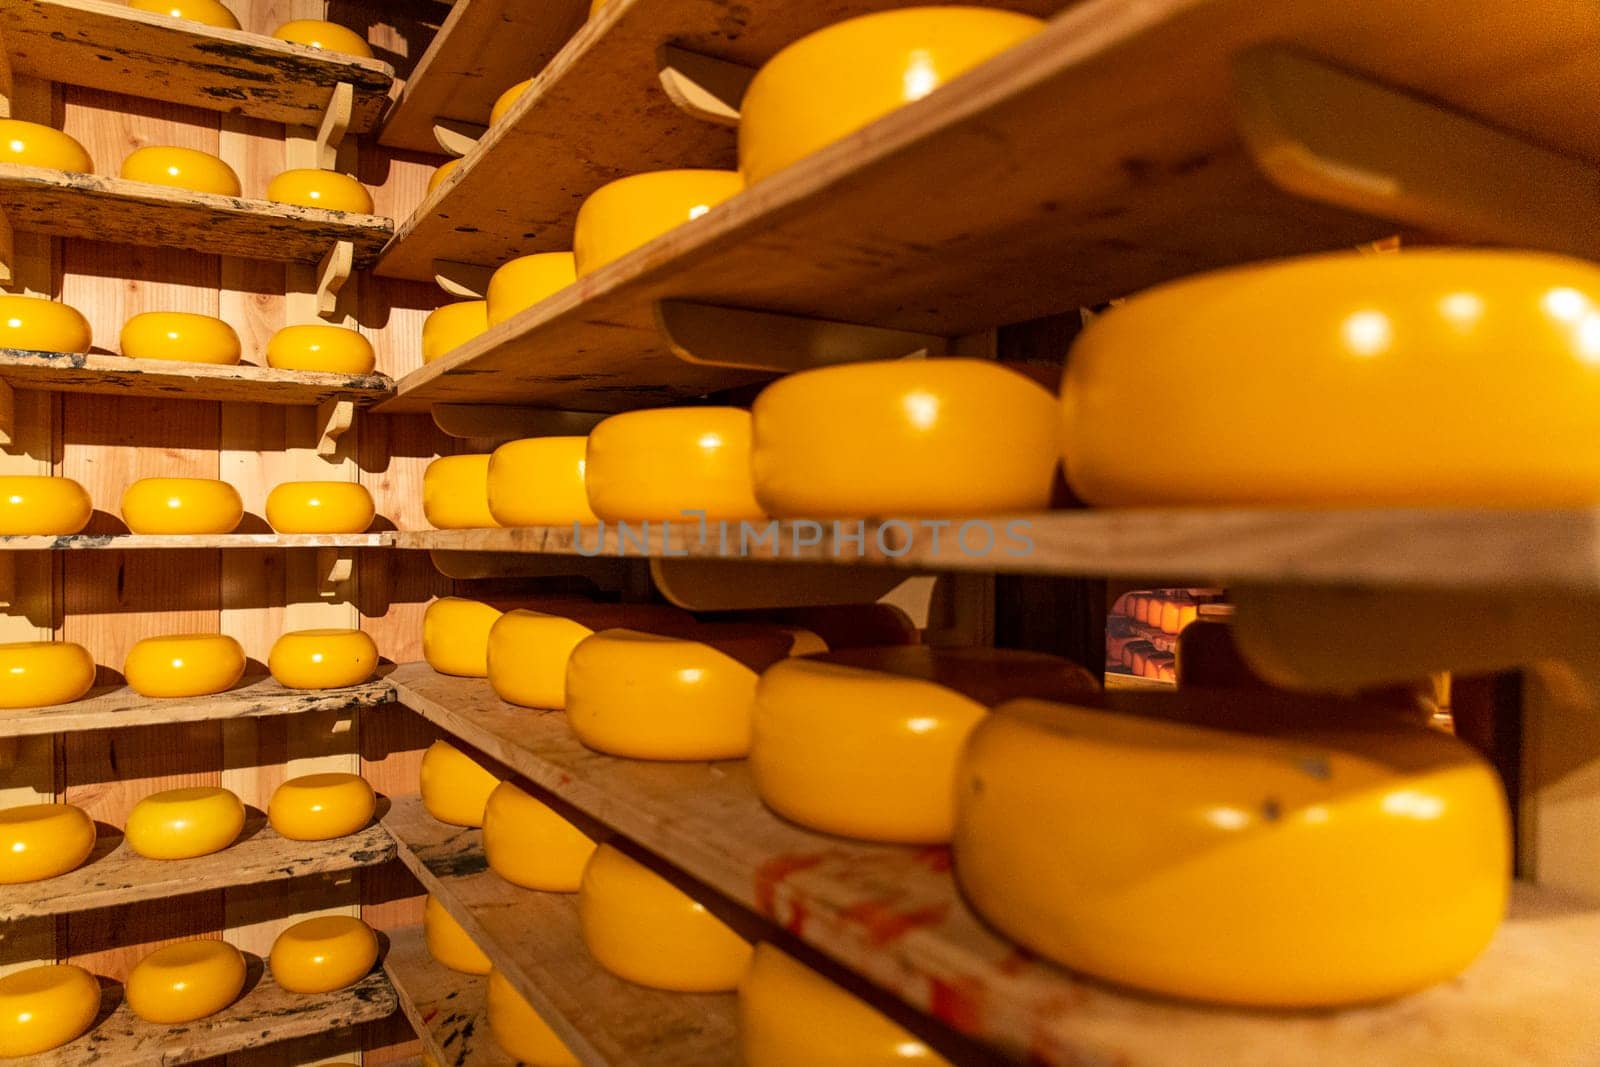 Dutch cheese wheels are stacked and available for purchase by the general public. by contas